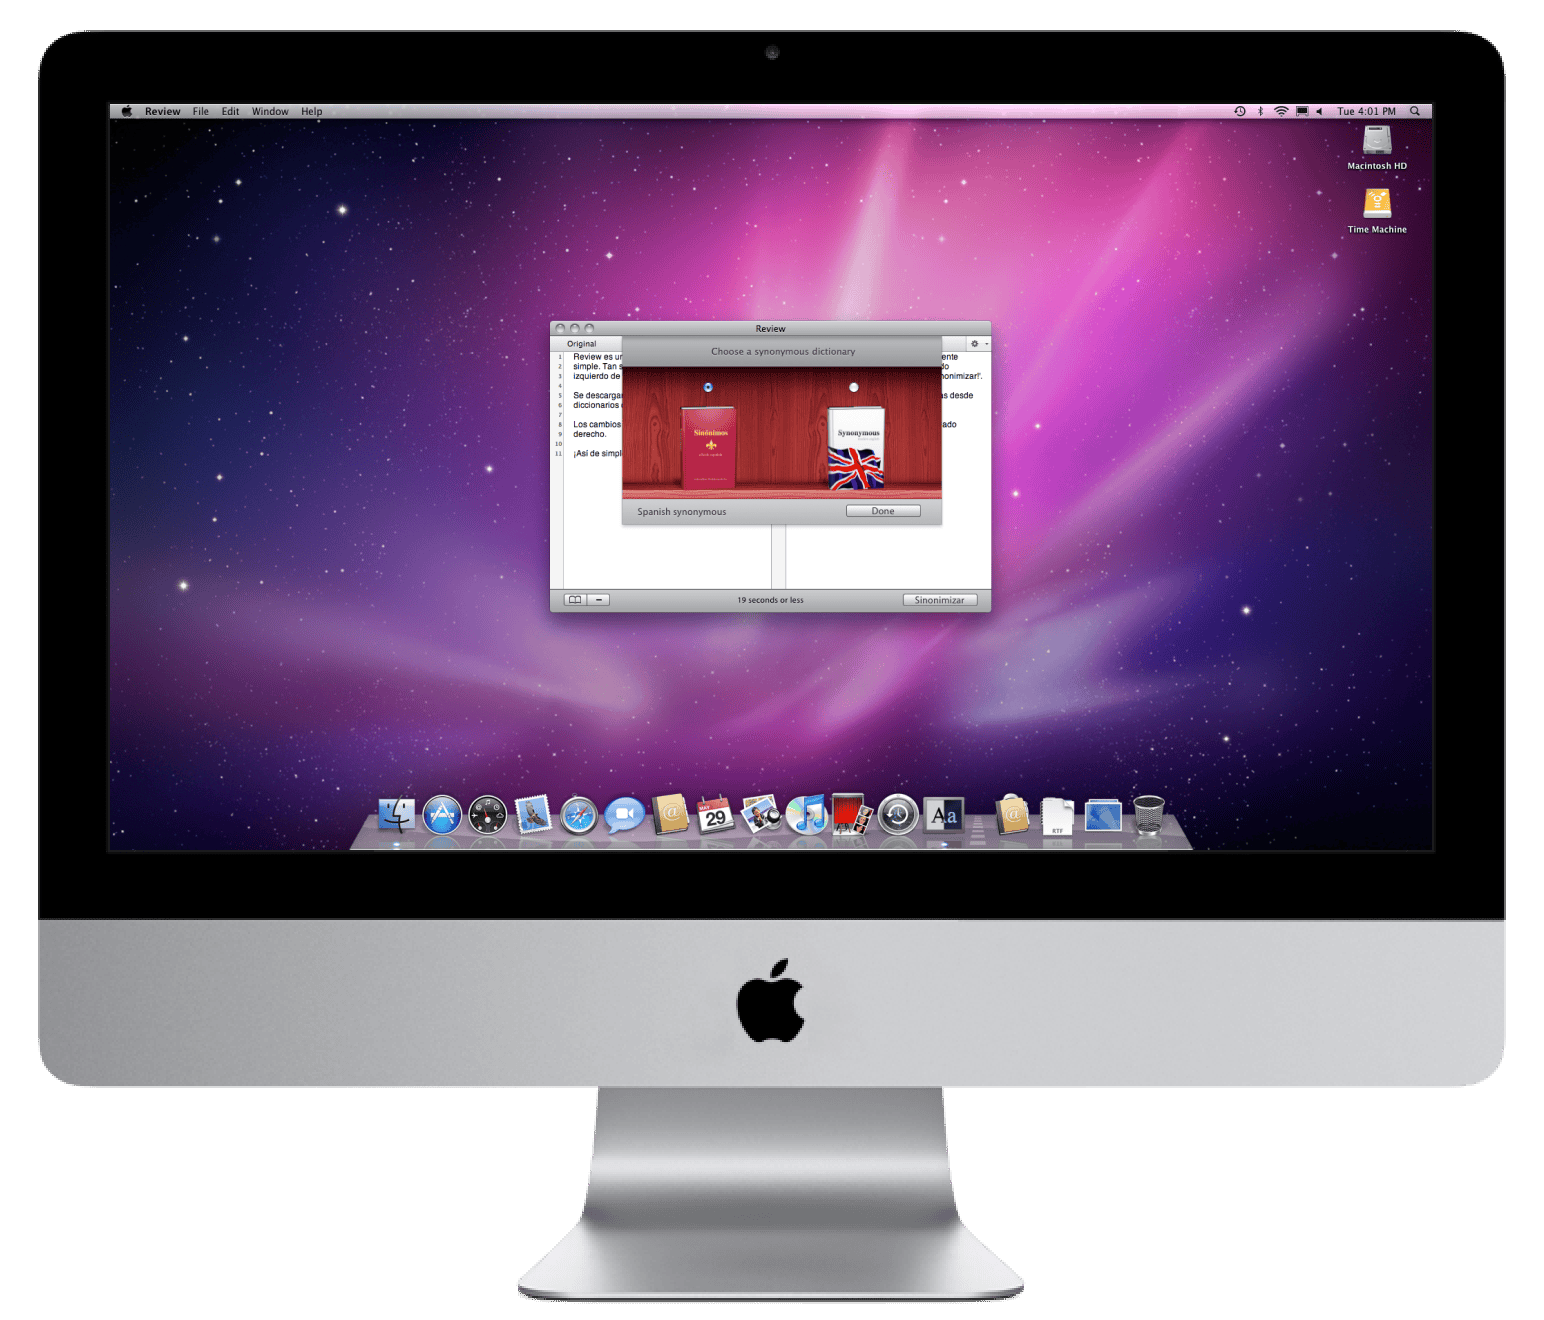 An iMac is displaying a text editor app with two panes. A sheet made of wood is presented on the main window, despicting two photorealistic dictionaries the user can choose from. The dock shows an icon of an uppercase and lowercase letter 